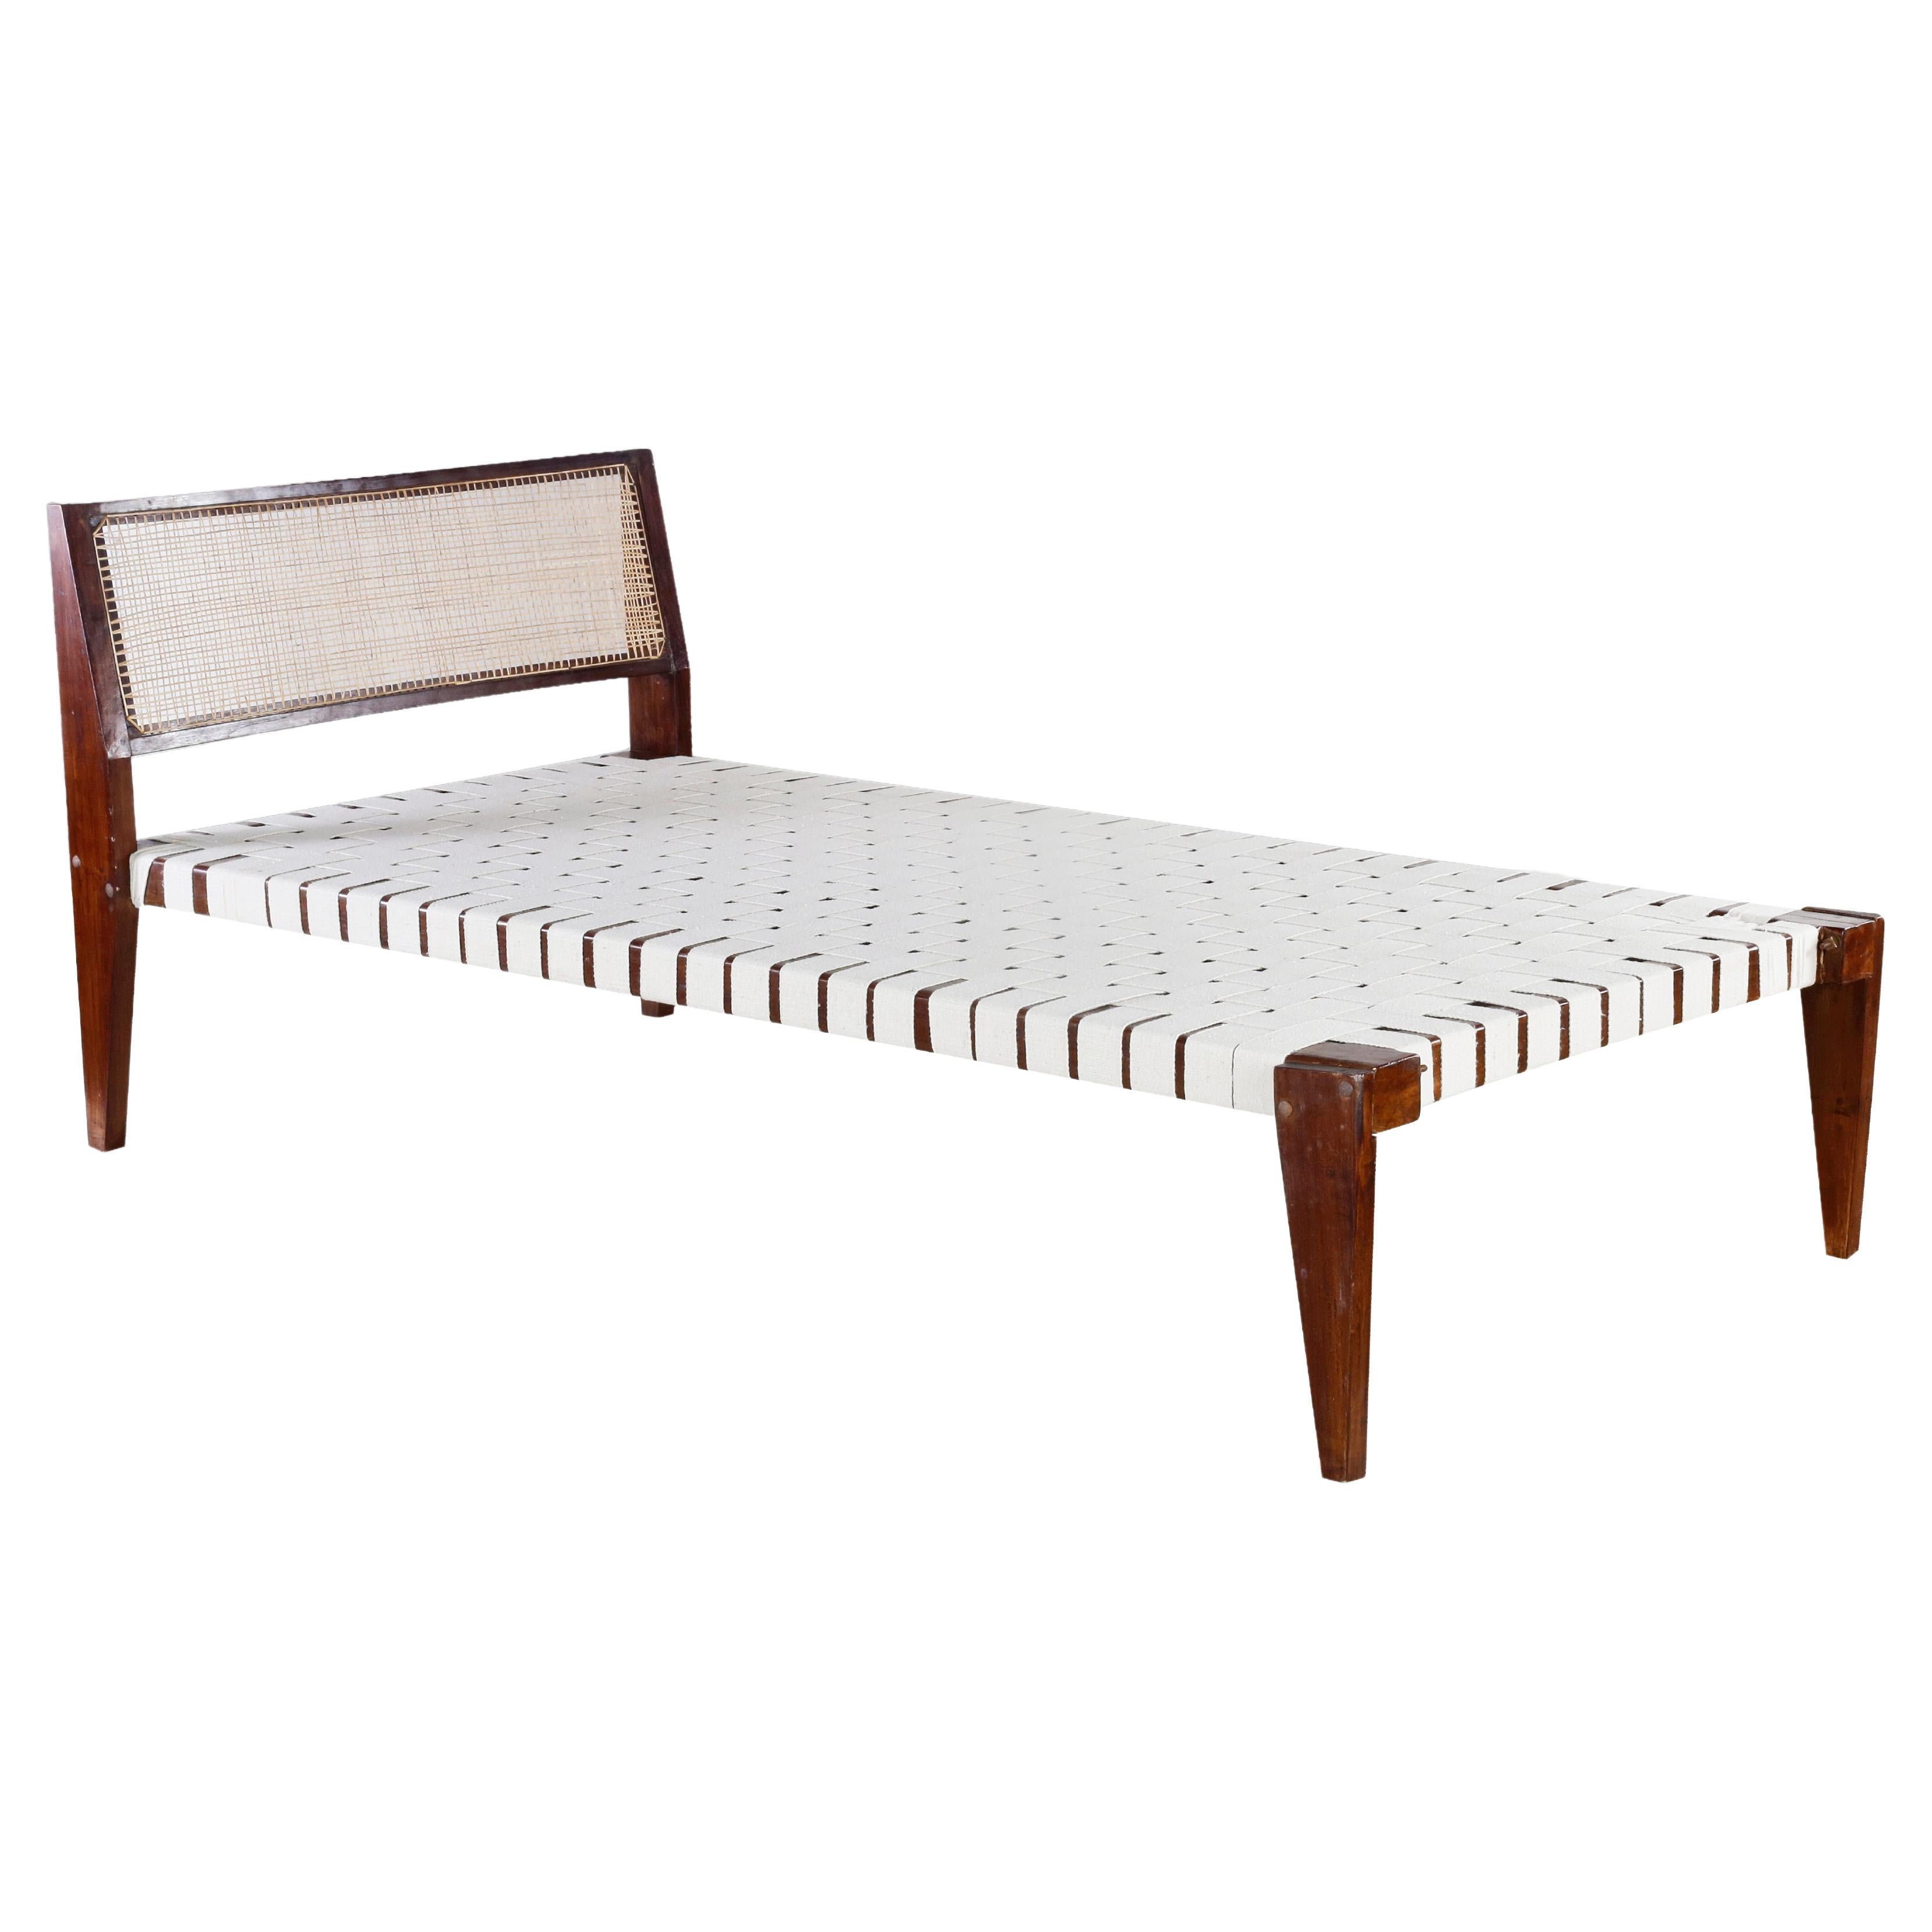 Pierre Jeanneret PJ-L-02-A Collapsible Single Bed / Authentic Mid-Century Modern For Sale